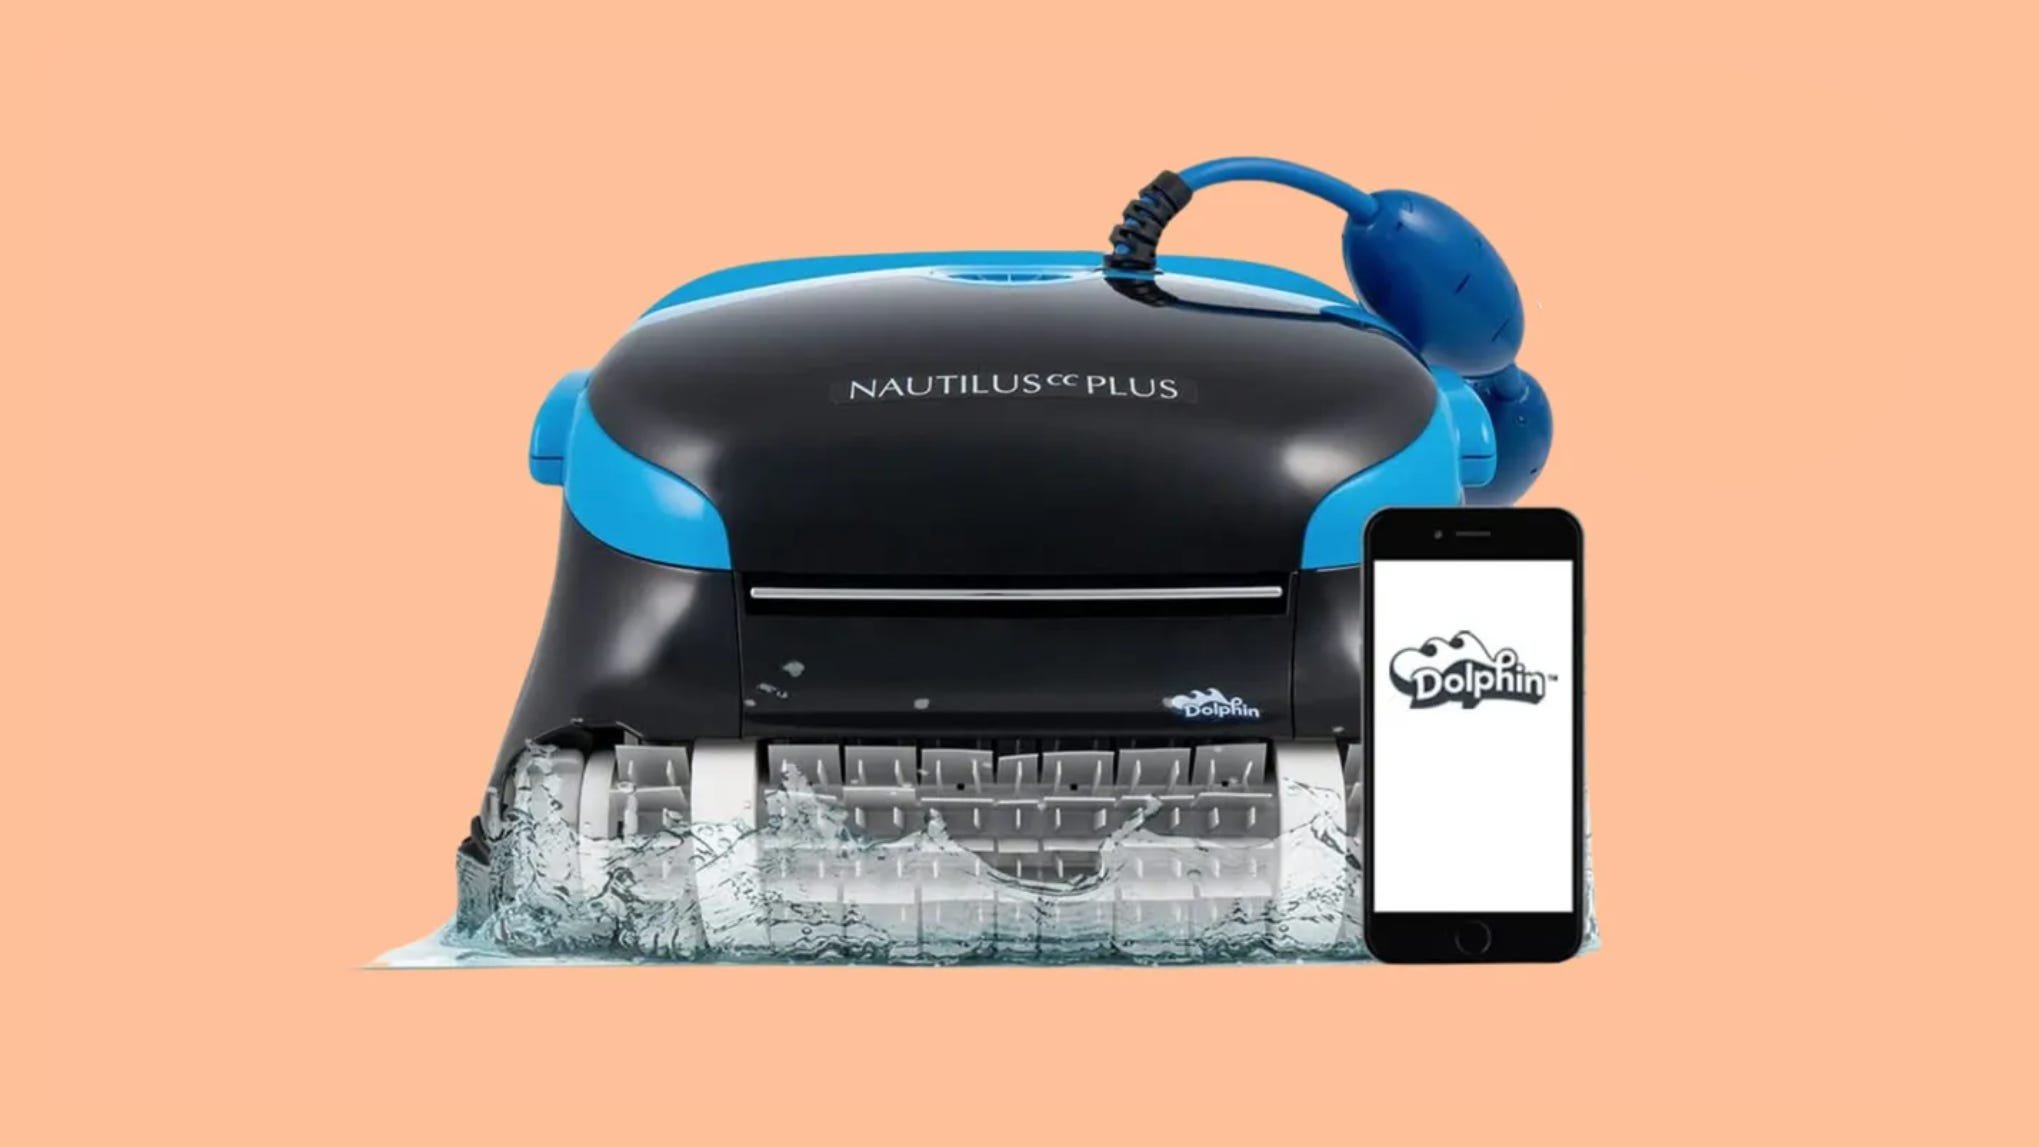 Our favorite Dolphin pool vacuum is $50 off at Amazon this summer